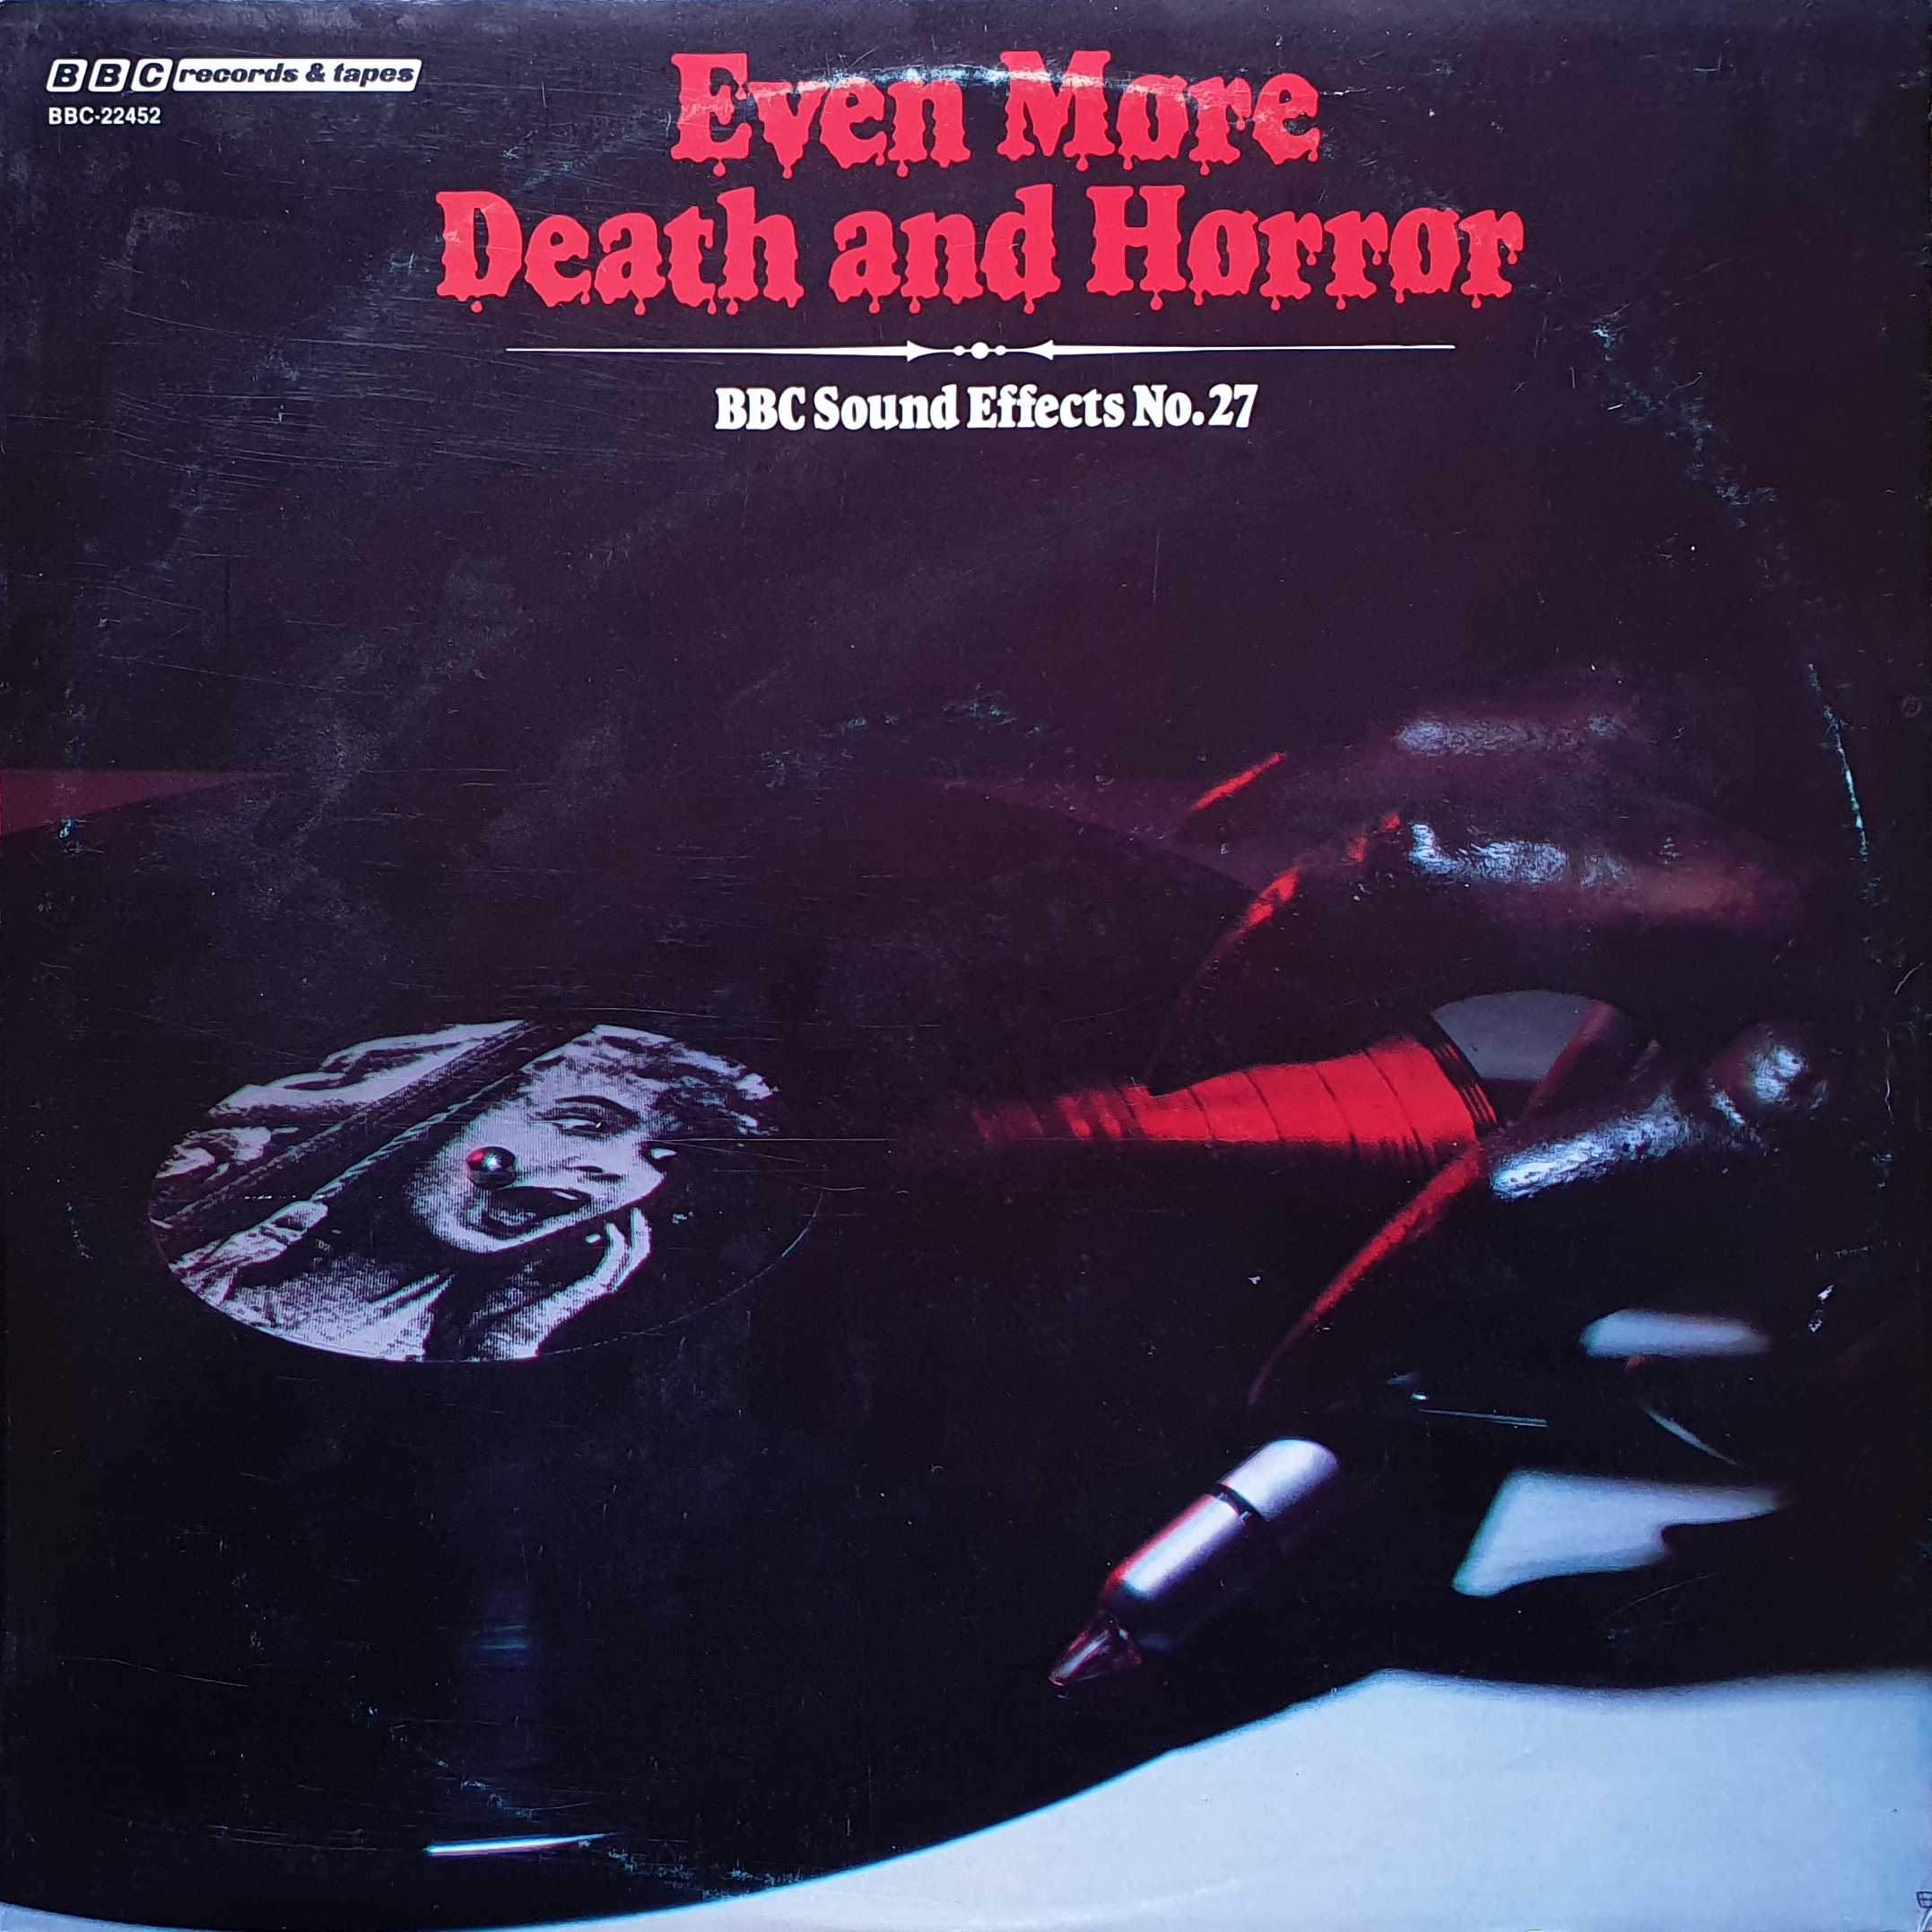 Picture of BBC - 22452 Even more death and horror (US import) by artist Various from the BBC albums - Records and Tapes library